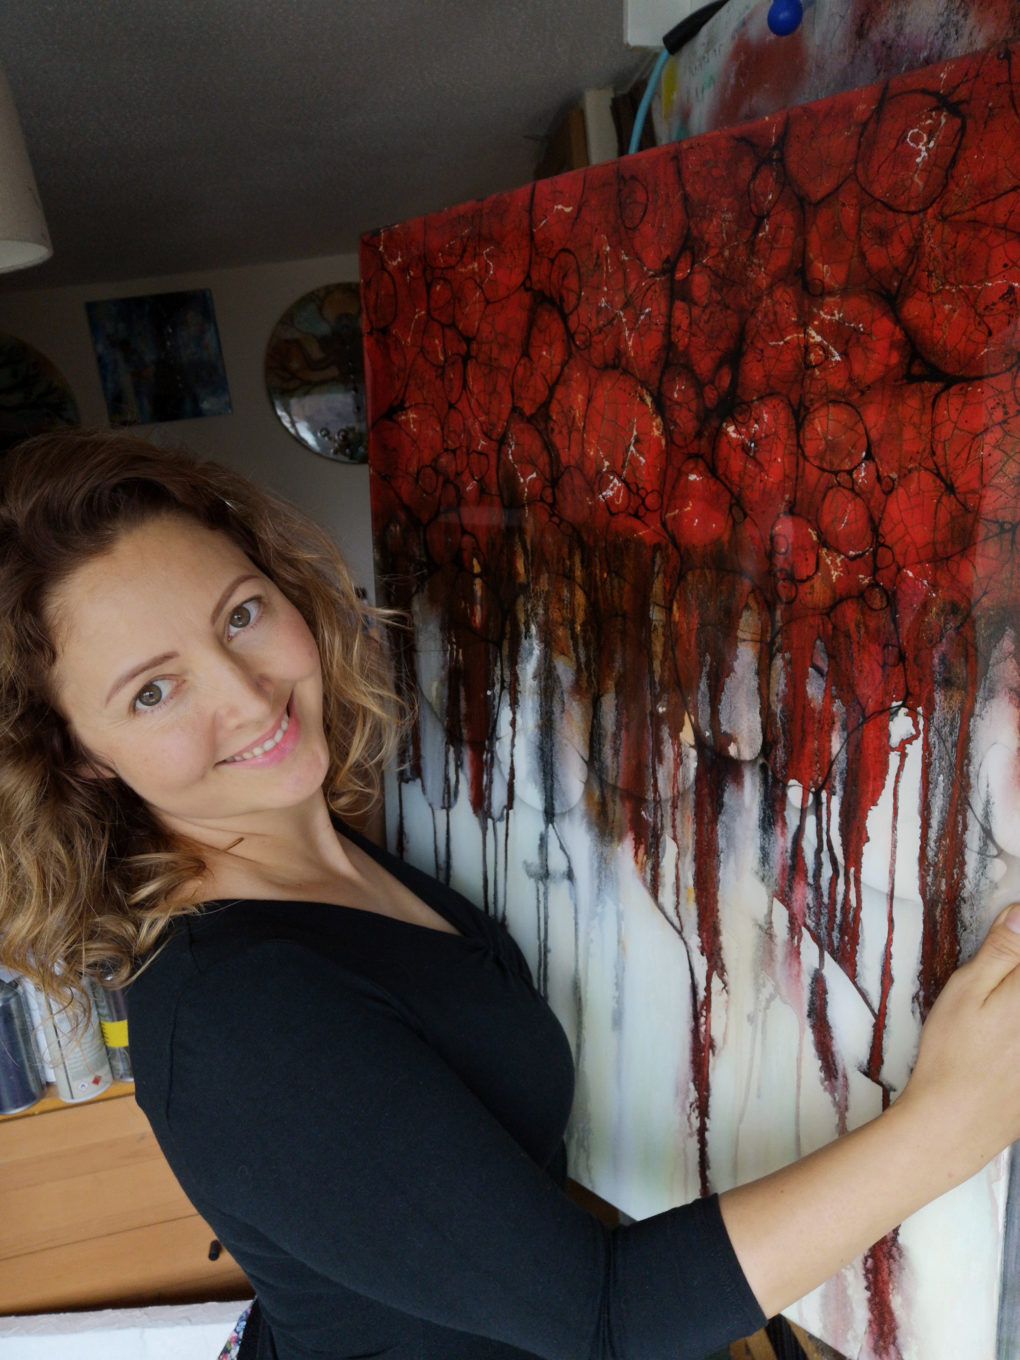 Jeanette is a white woman. She has mid length curls and is turned to face the camera and smiling. She is wearing a black top and is holding a painting which has vivid red circles and lines. 